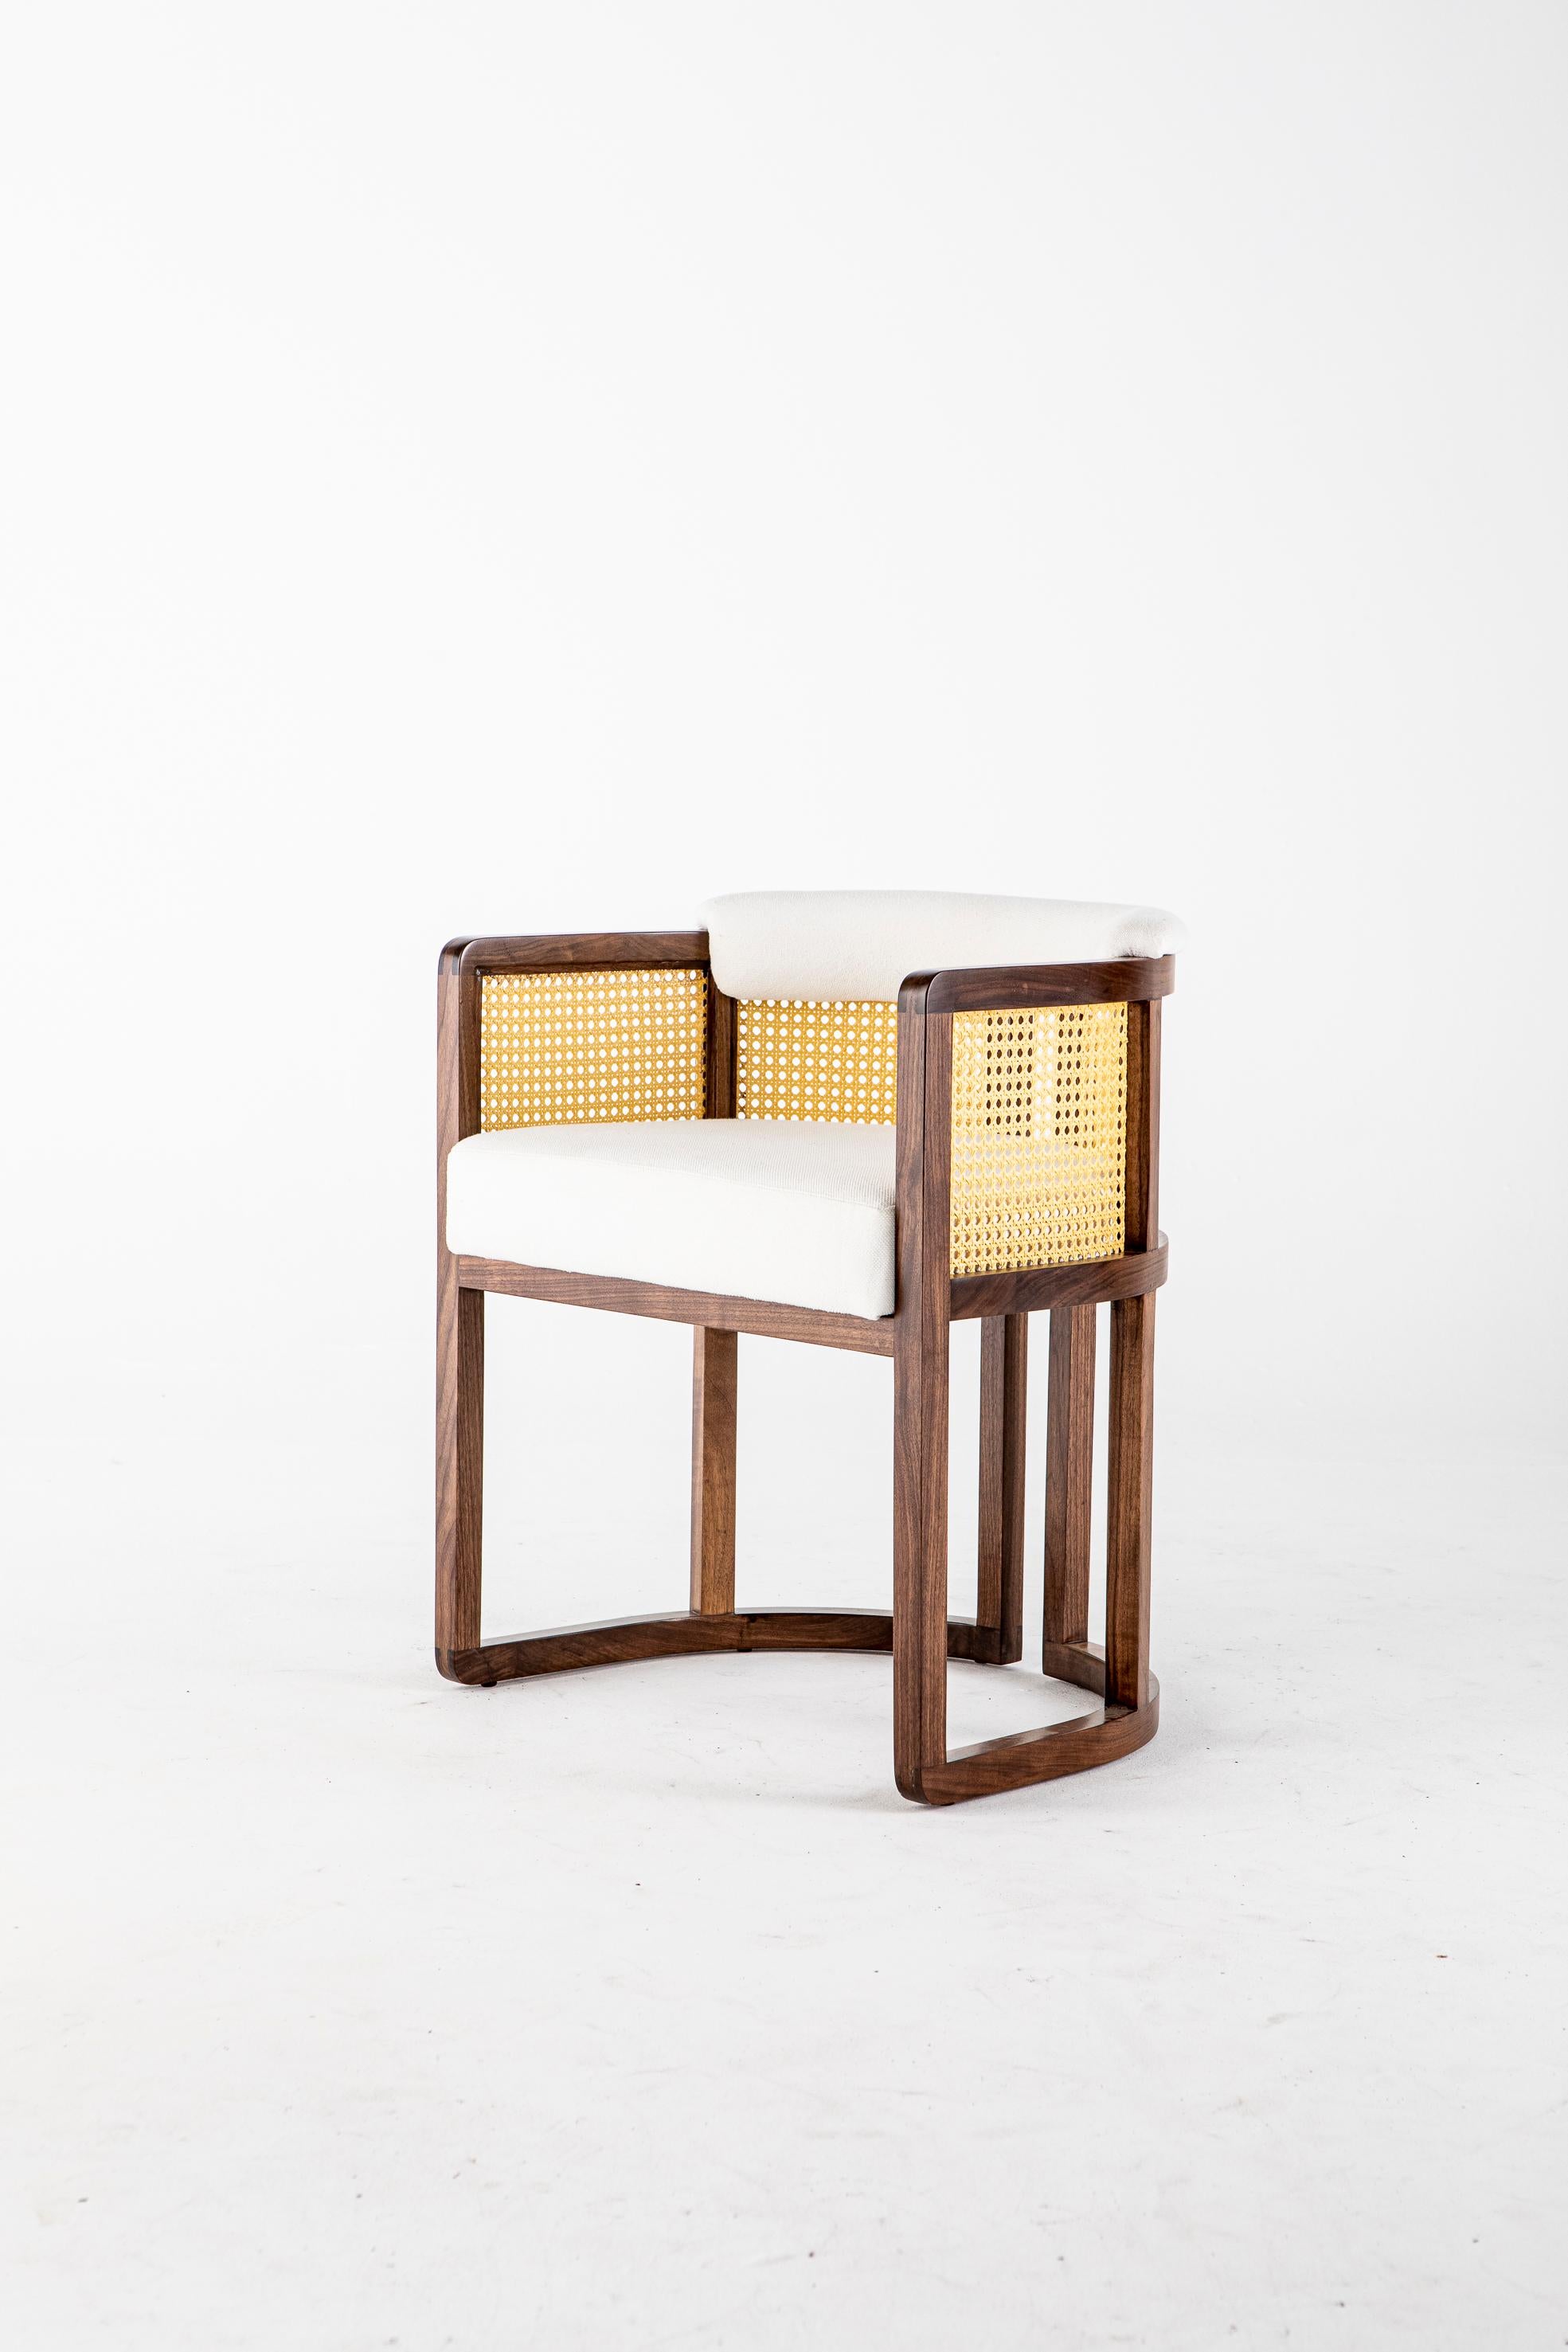 Livingston dining chair by Egg Designs
Dimensions: 62 L x 49 D x 69 H cm
Materials: Walnut timber, synthetic rattan, brass, linen upholstery

Founded by South Africans and life partners, Greg and Roche Dry - Egg is a unique perspective in